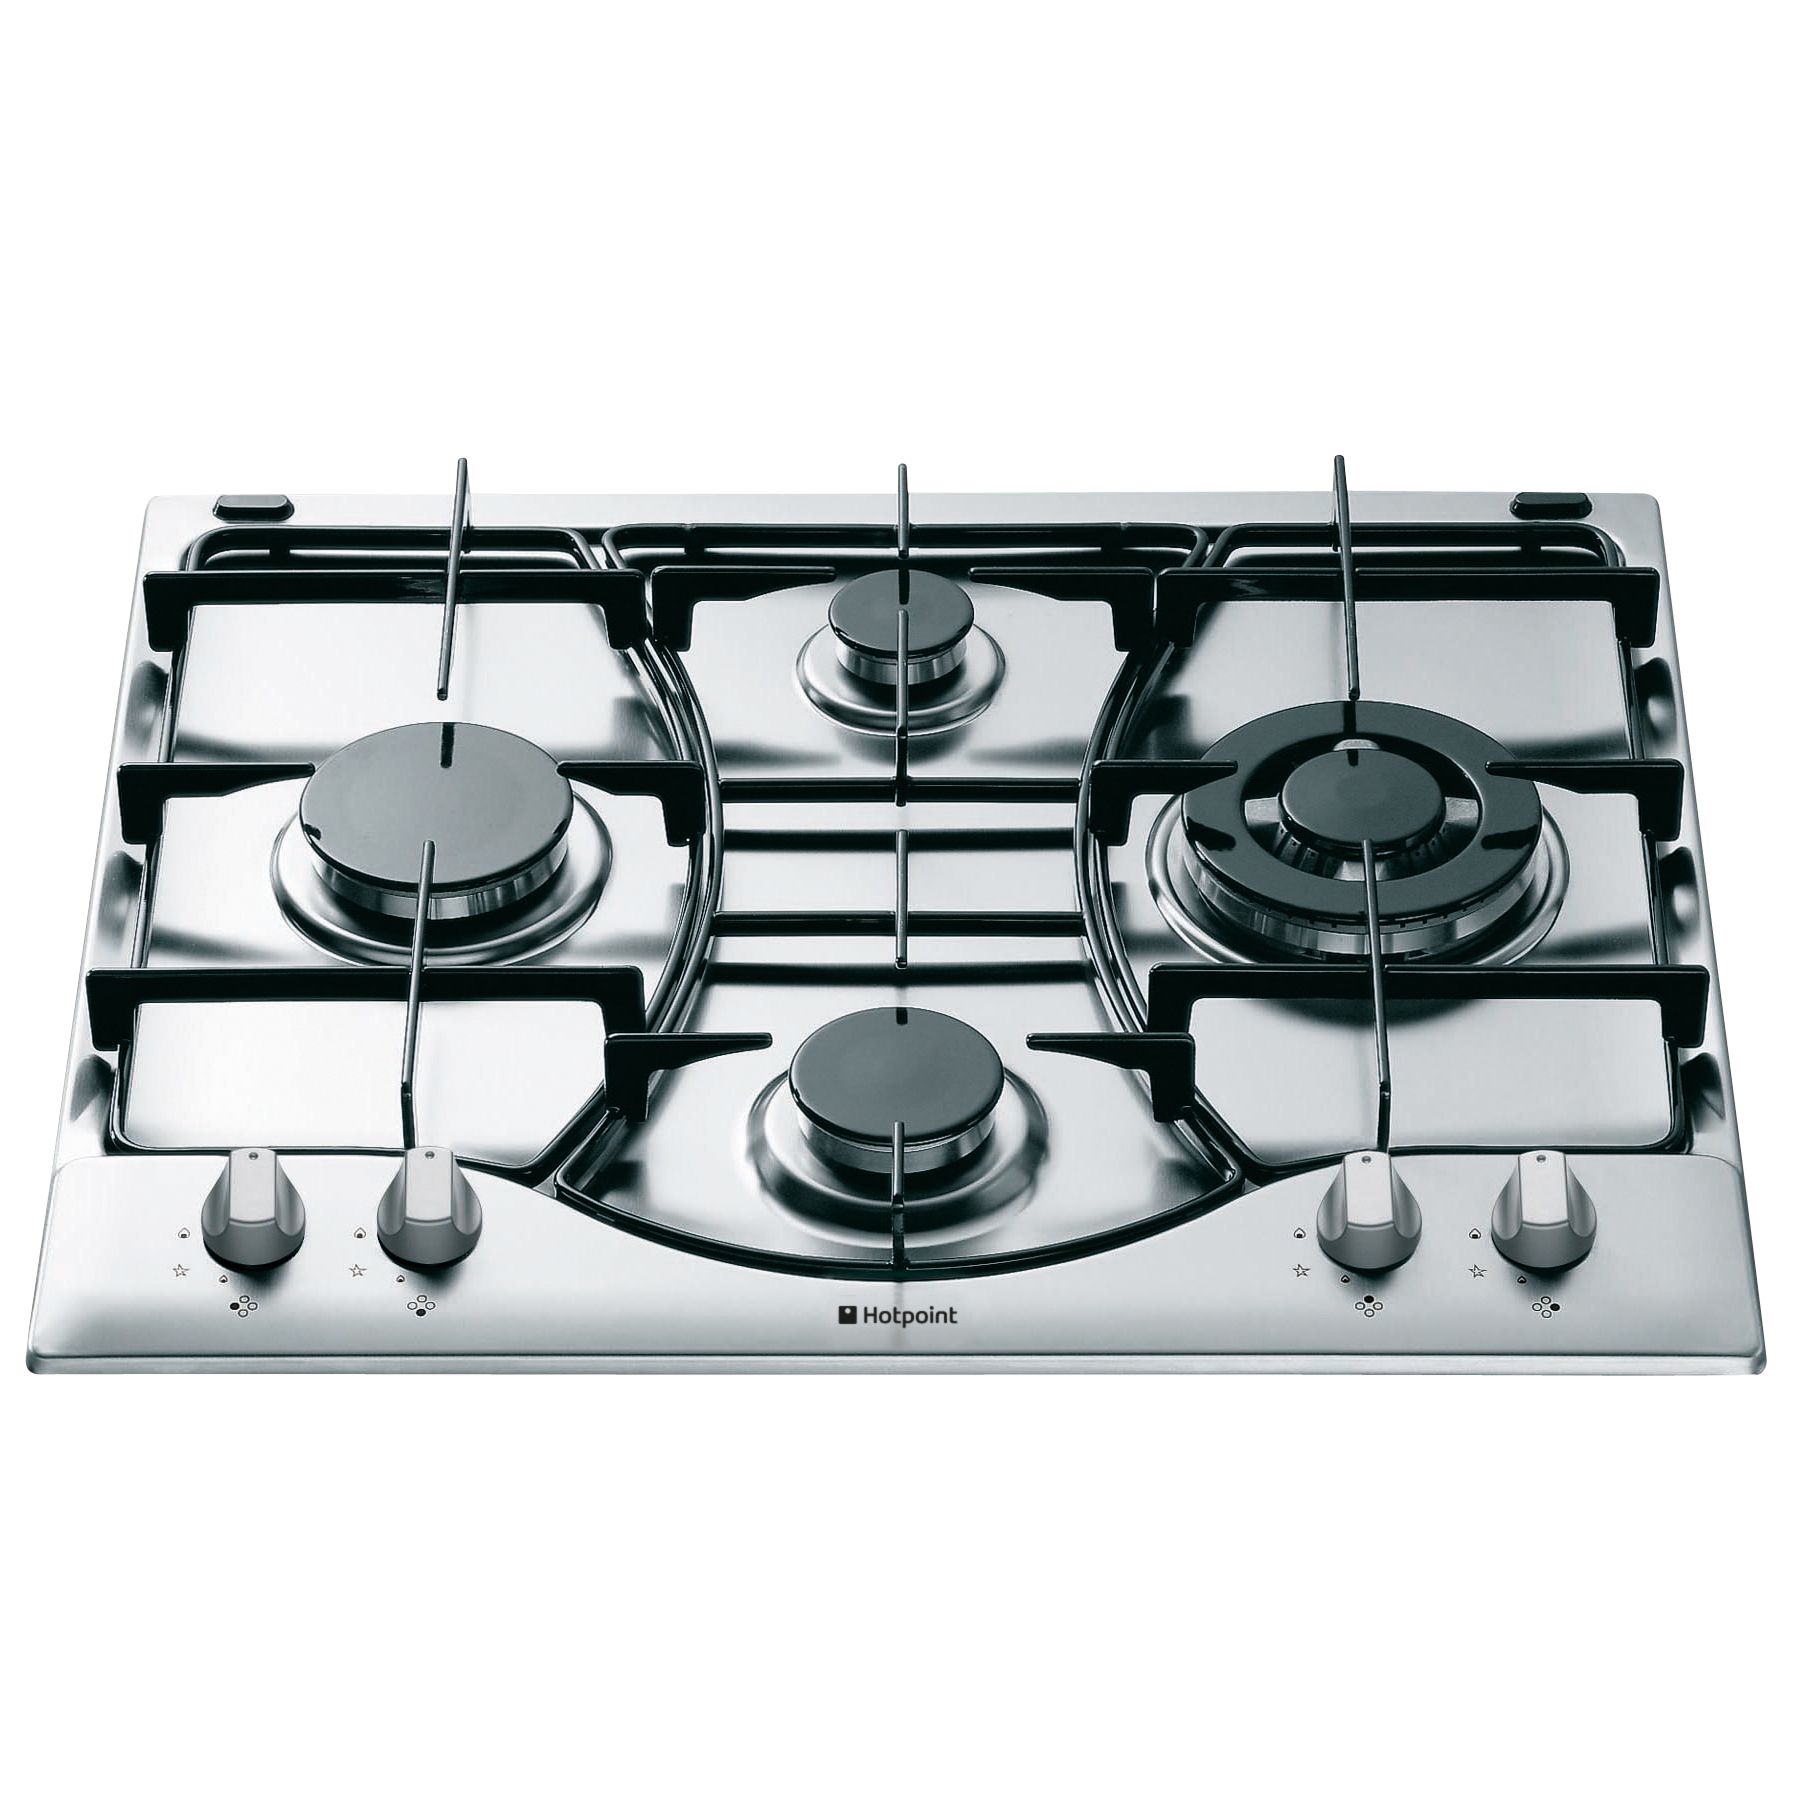 Hotpoint GF640X Gas Hob, Stainless Steel at John Lewis